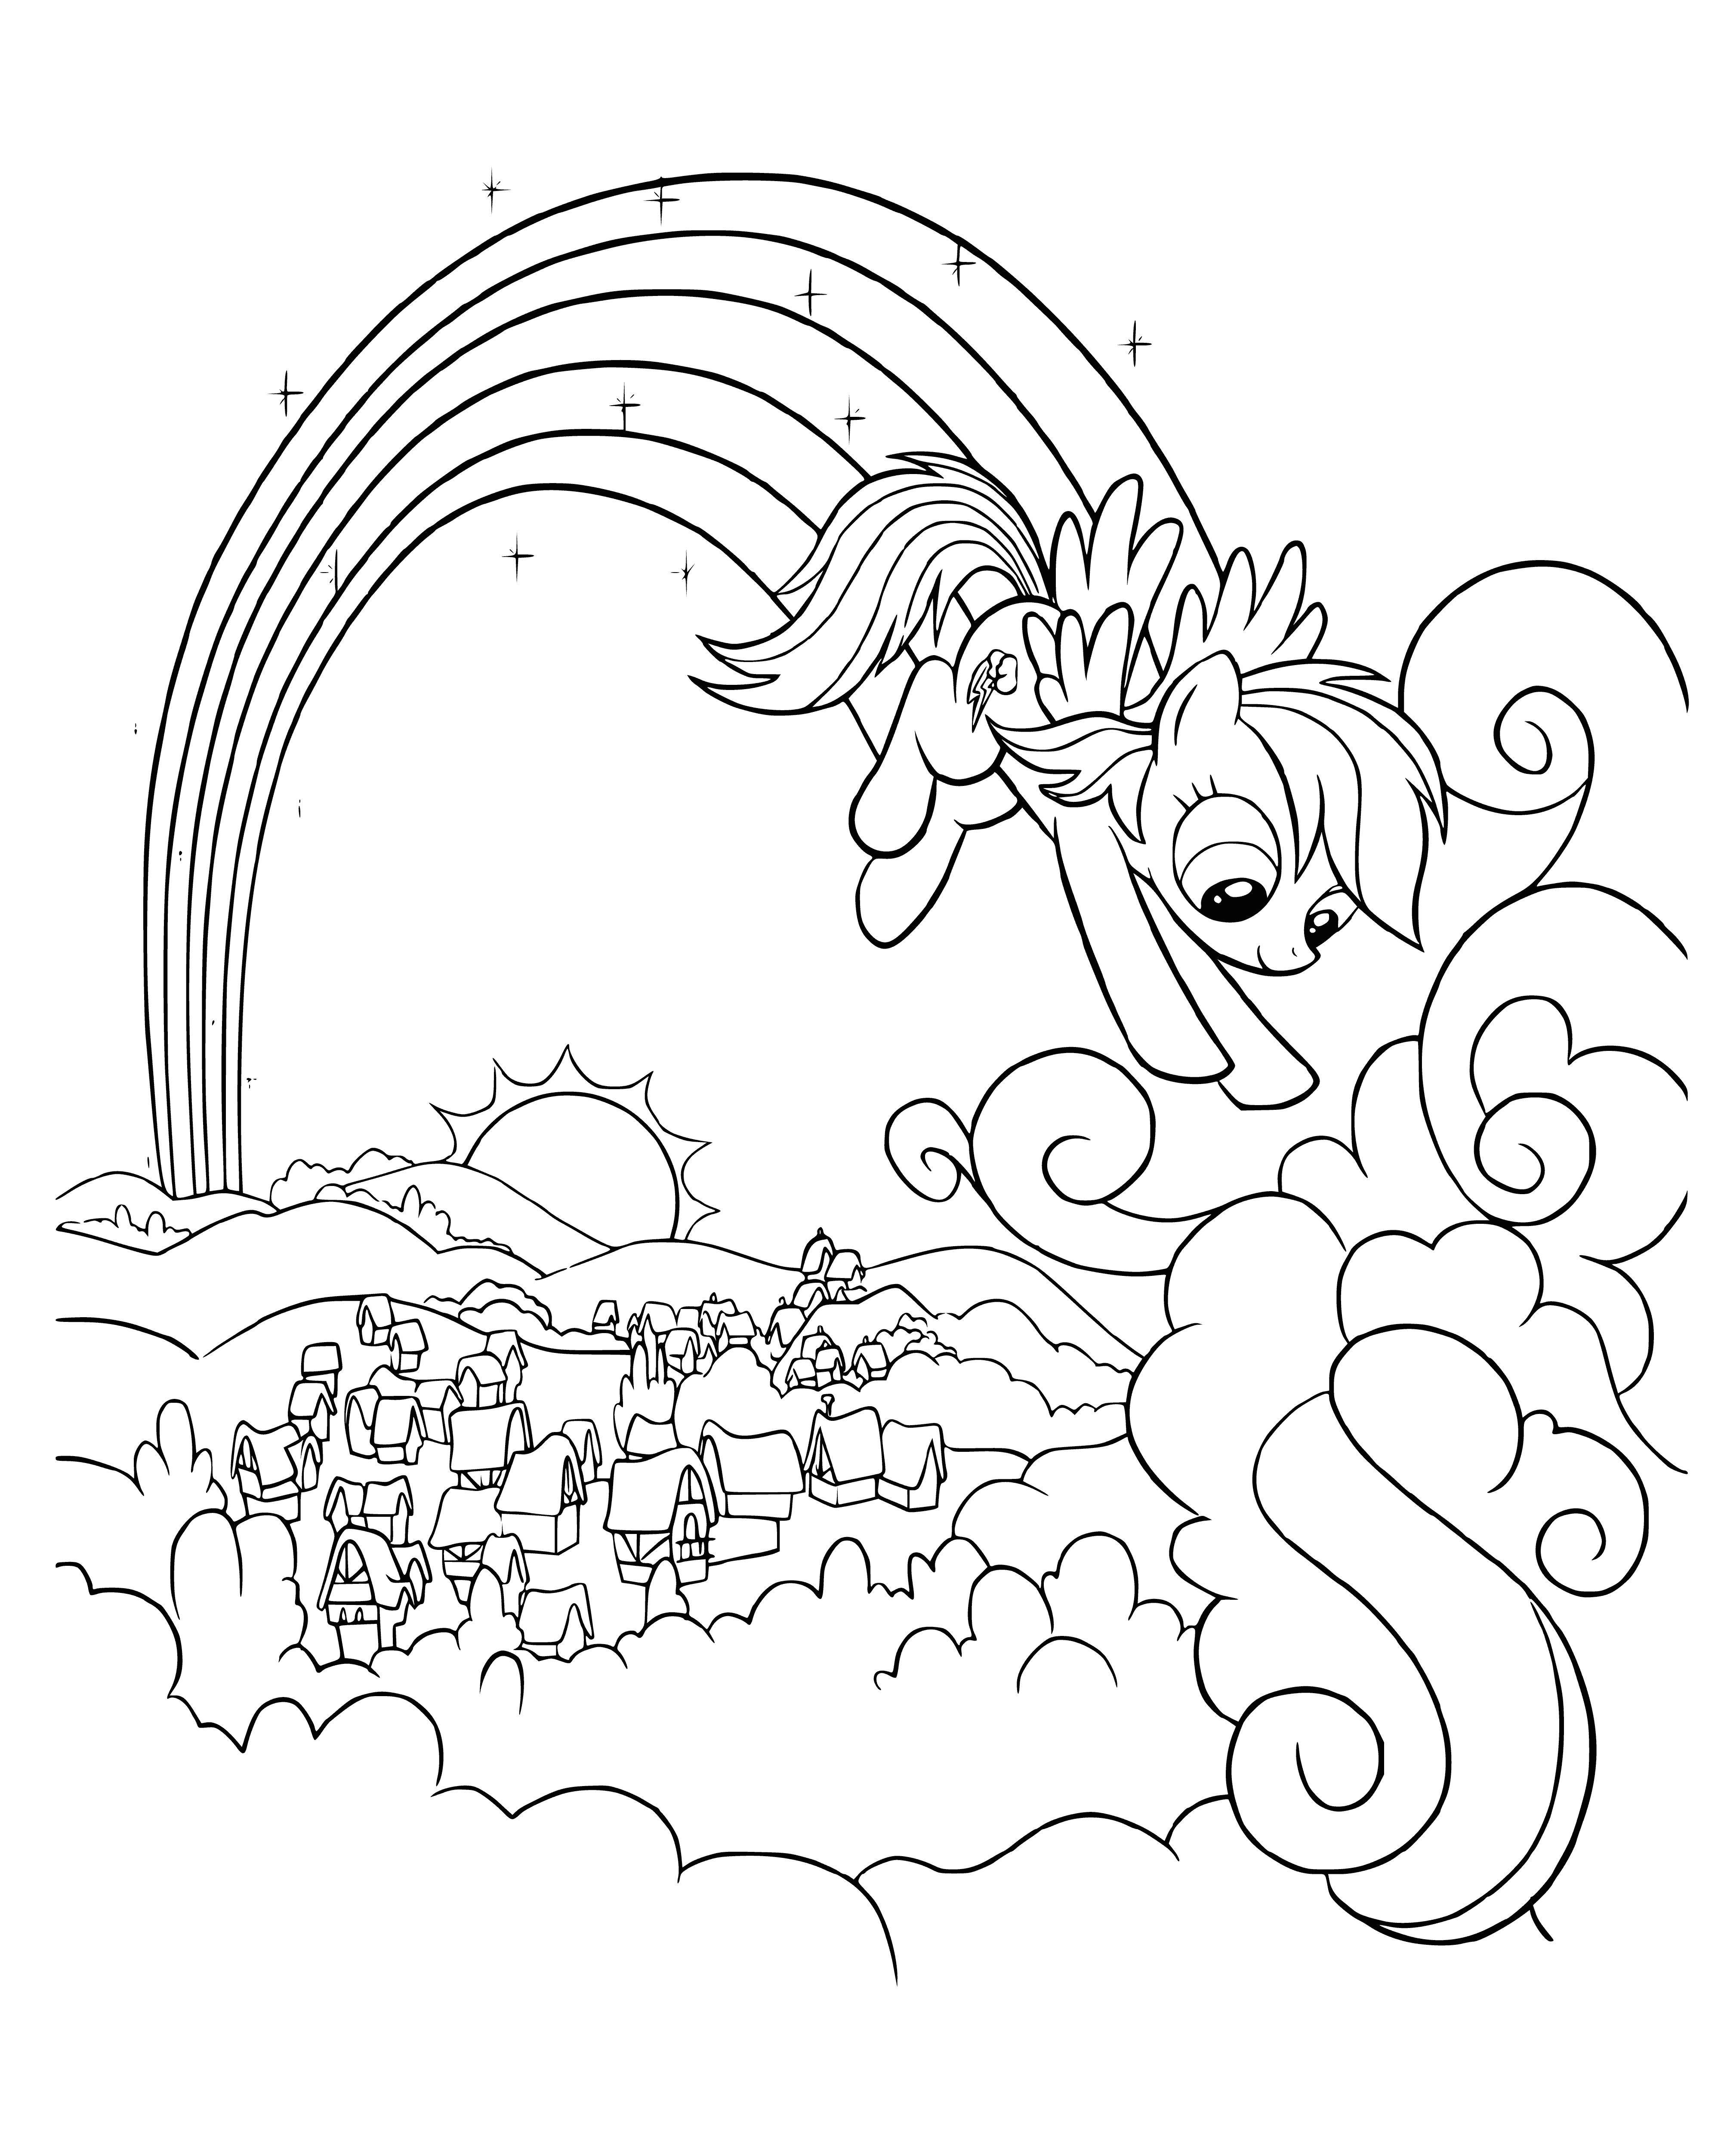 coloring page: Rainbow Dash is a blue Pegasus w/ rainbow mane & tail & white star on her flank. A talented flyer, she uses her speed & flying skills for amazing feats.